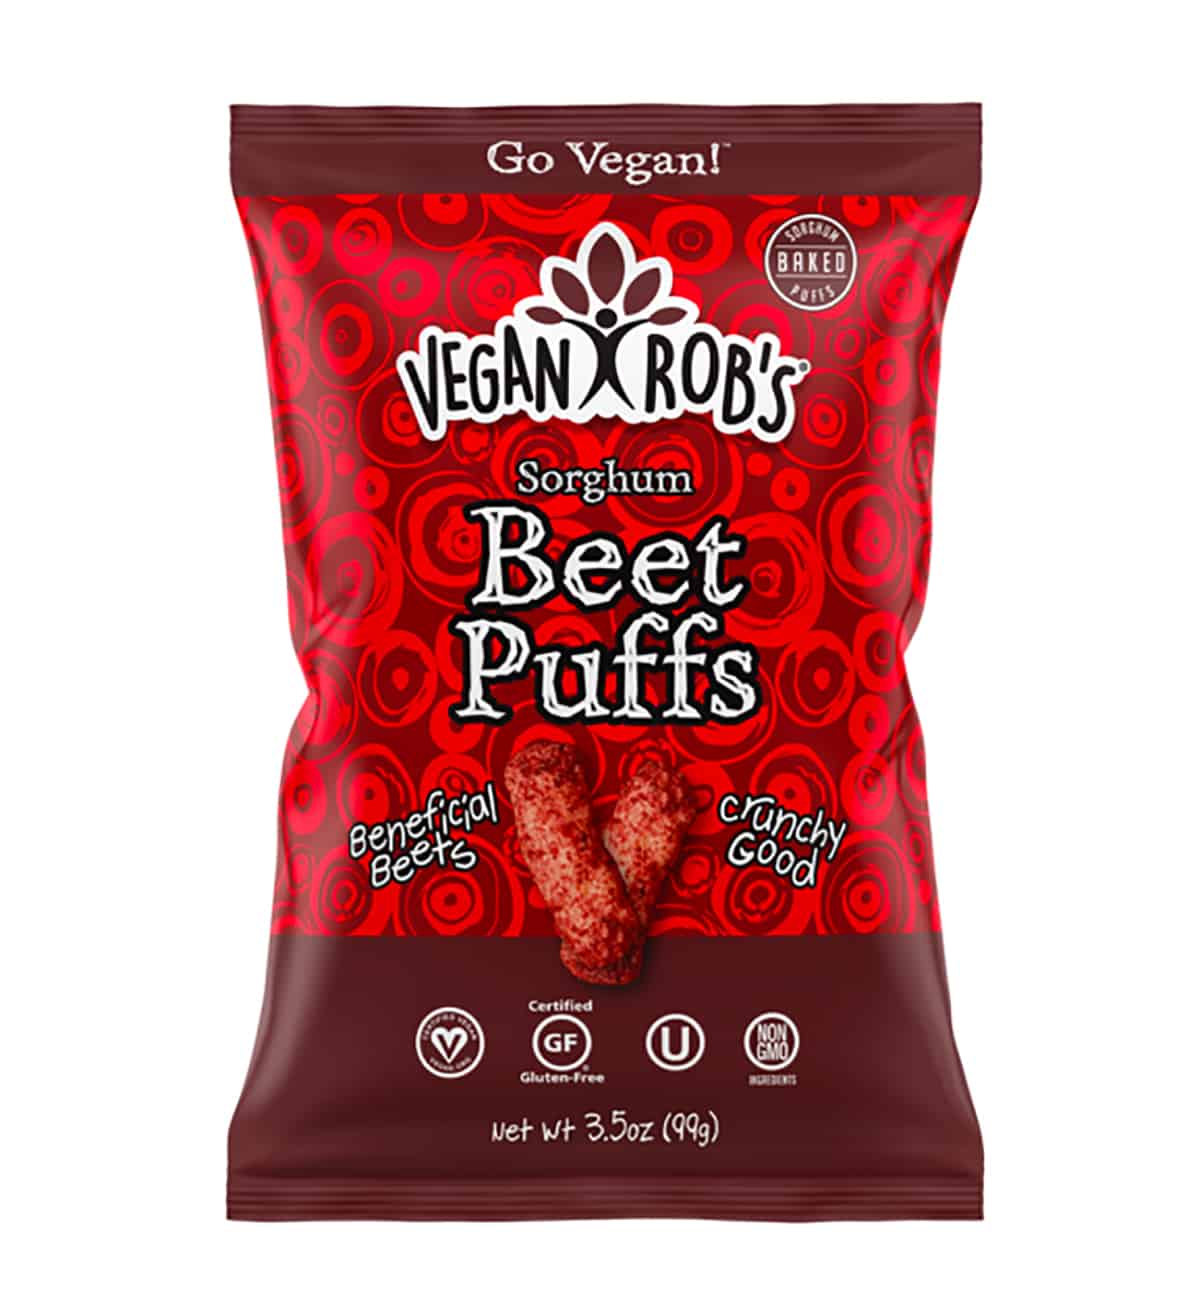 A package of beet puffs from the brand "Vegan Rob's".